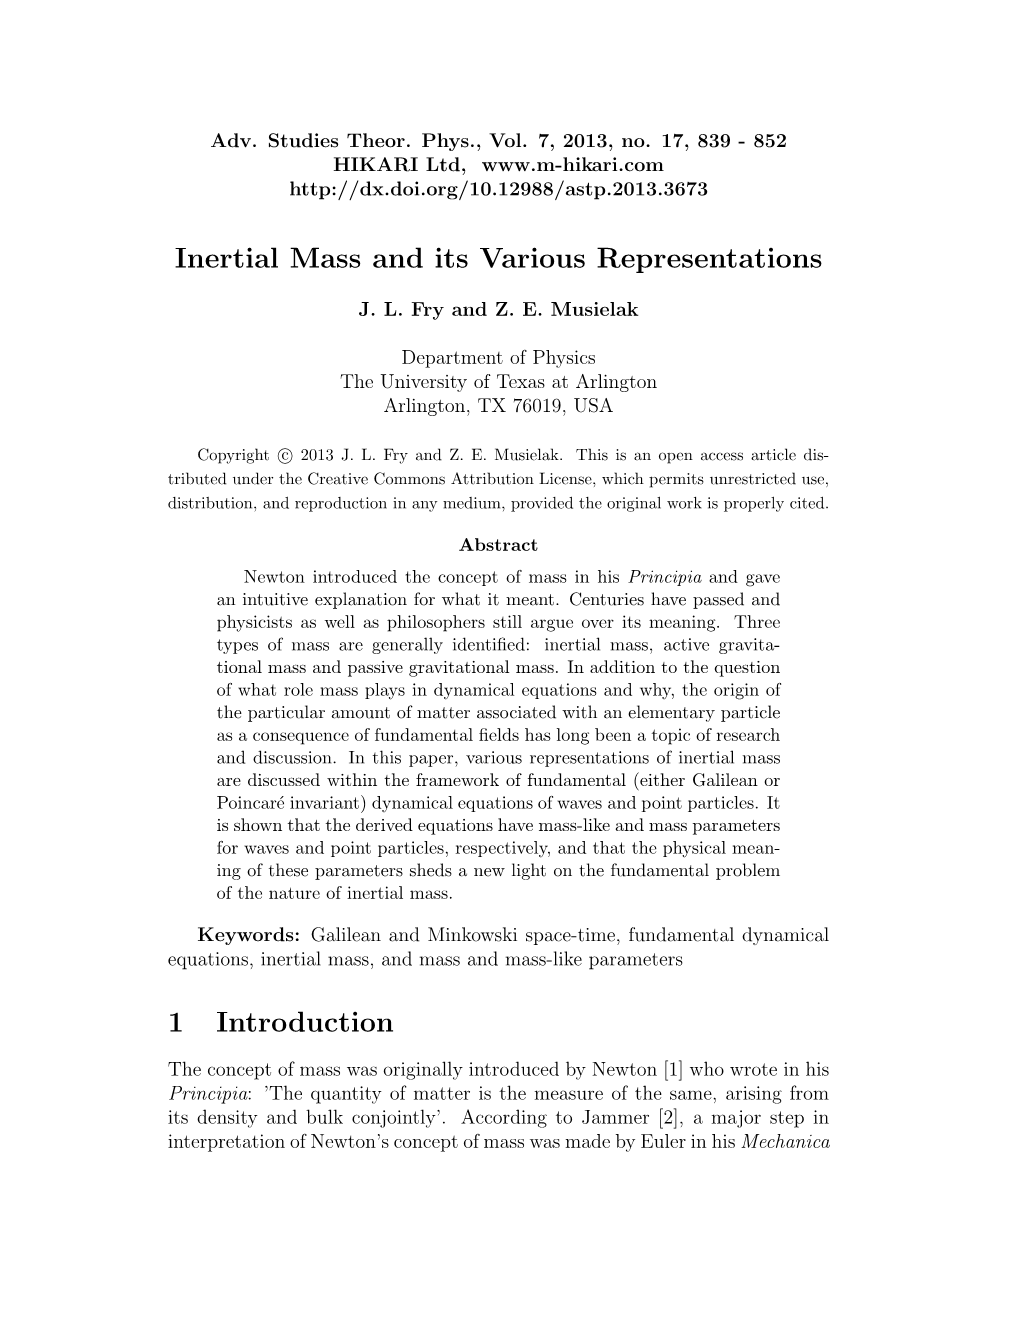 Inertial Mass and Its Various Representations 1 Introduction